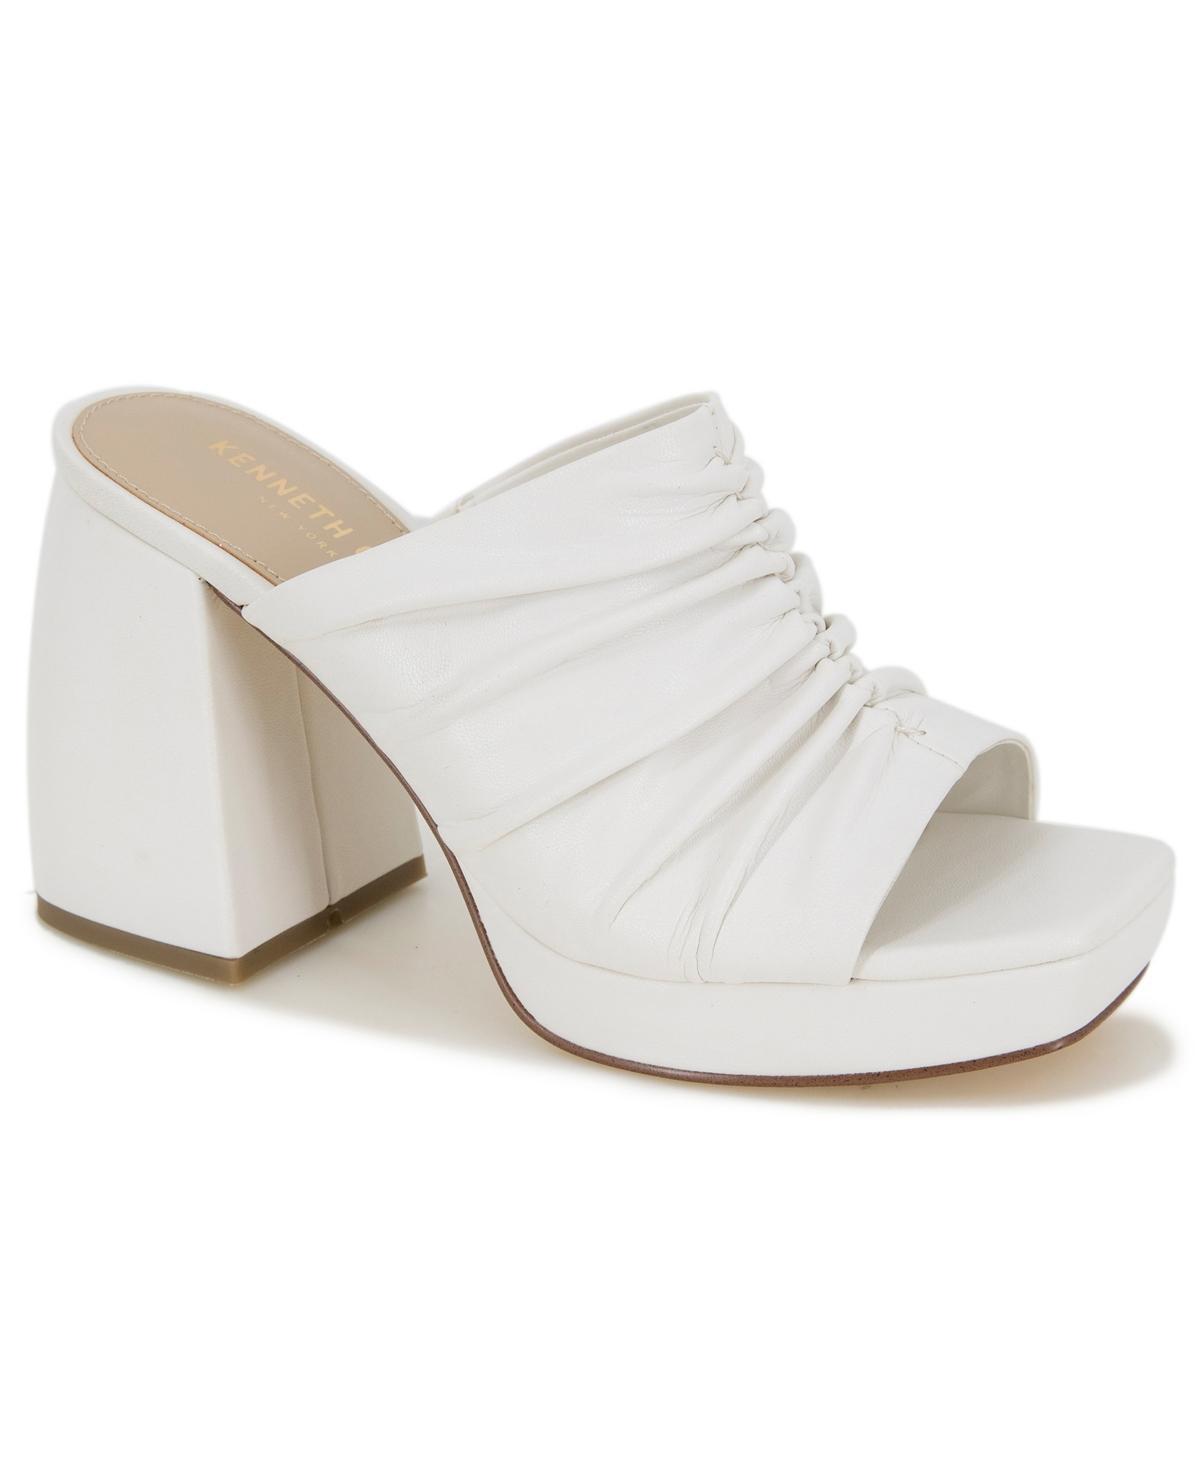 Kenneth Cole Womens Anika Block Heel Ruched Platform Sandals - White Product Image